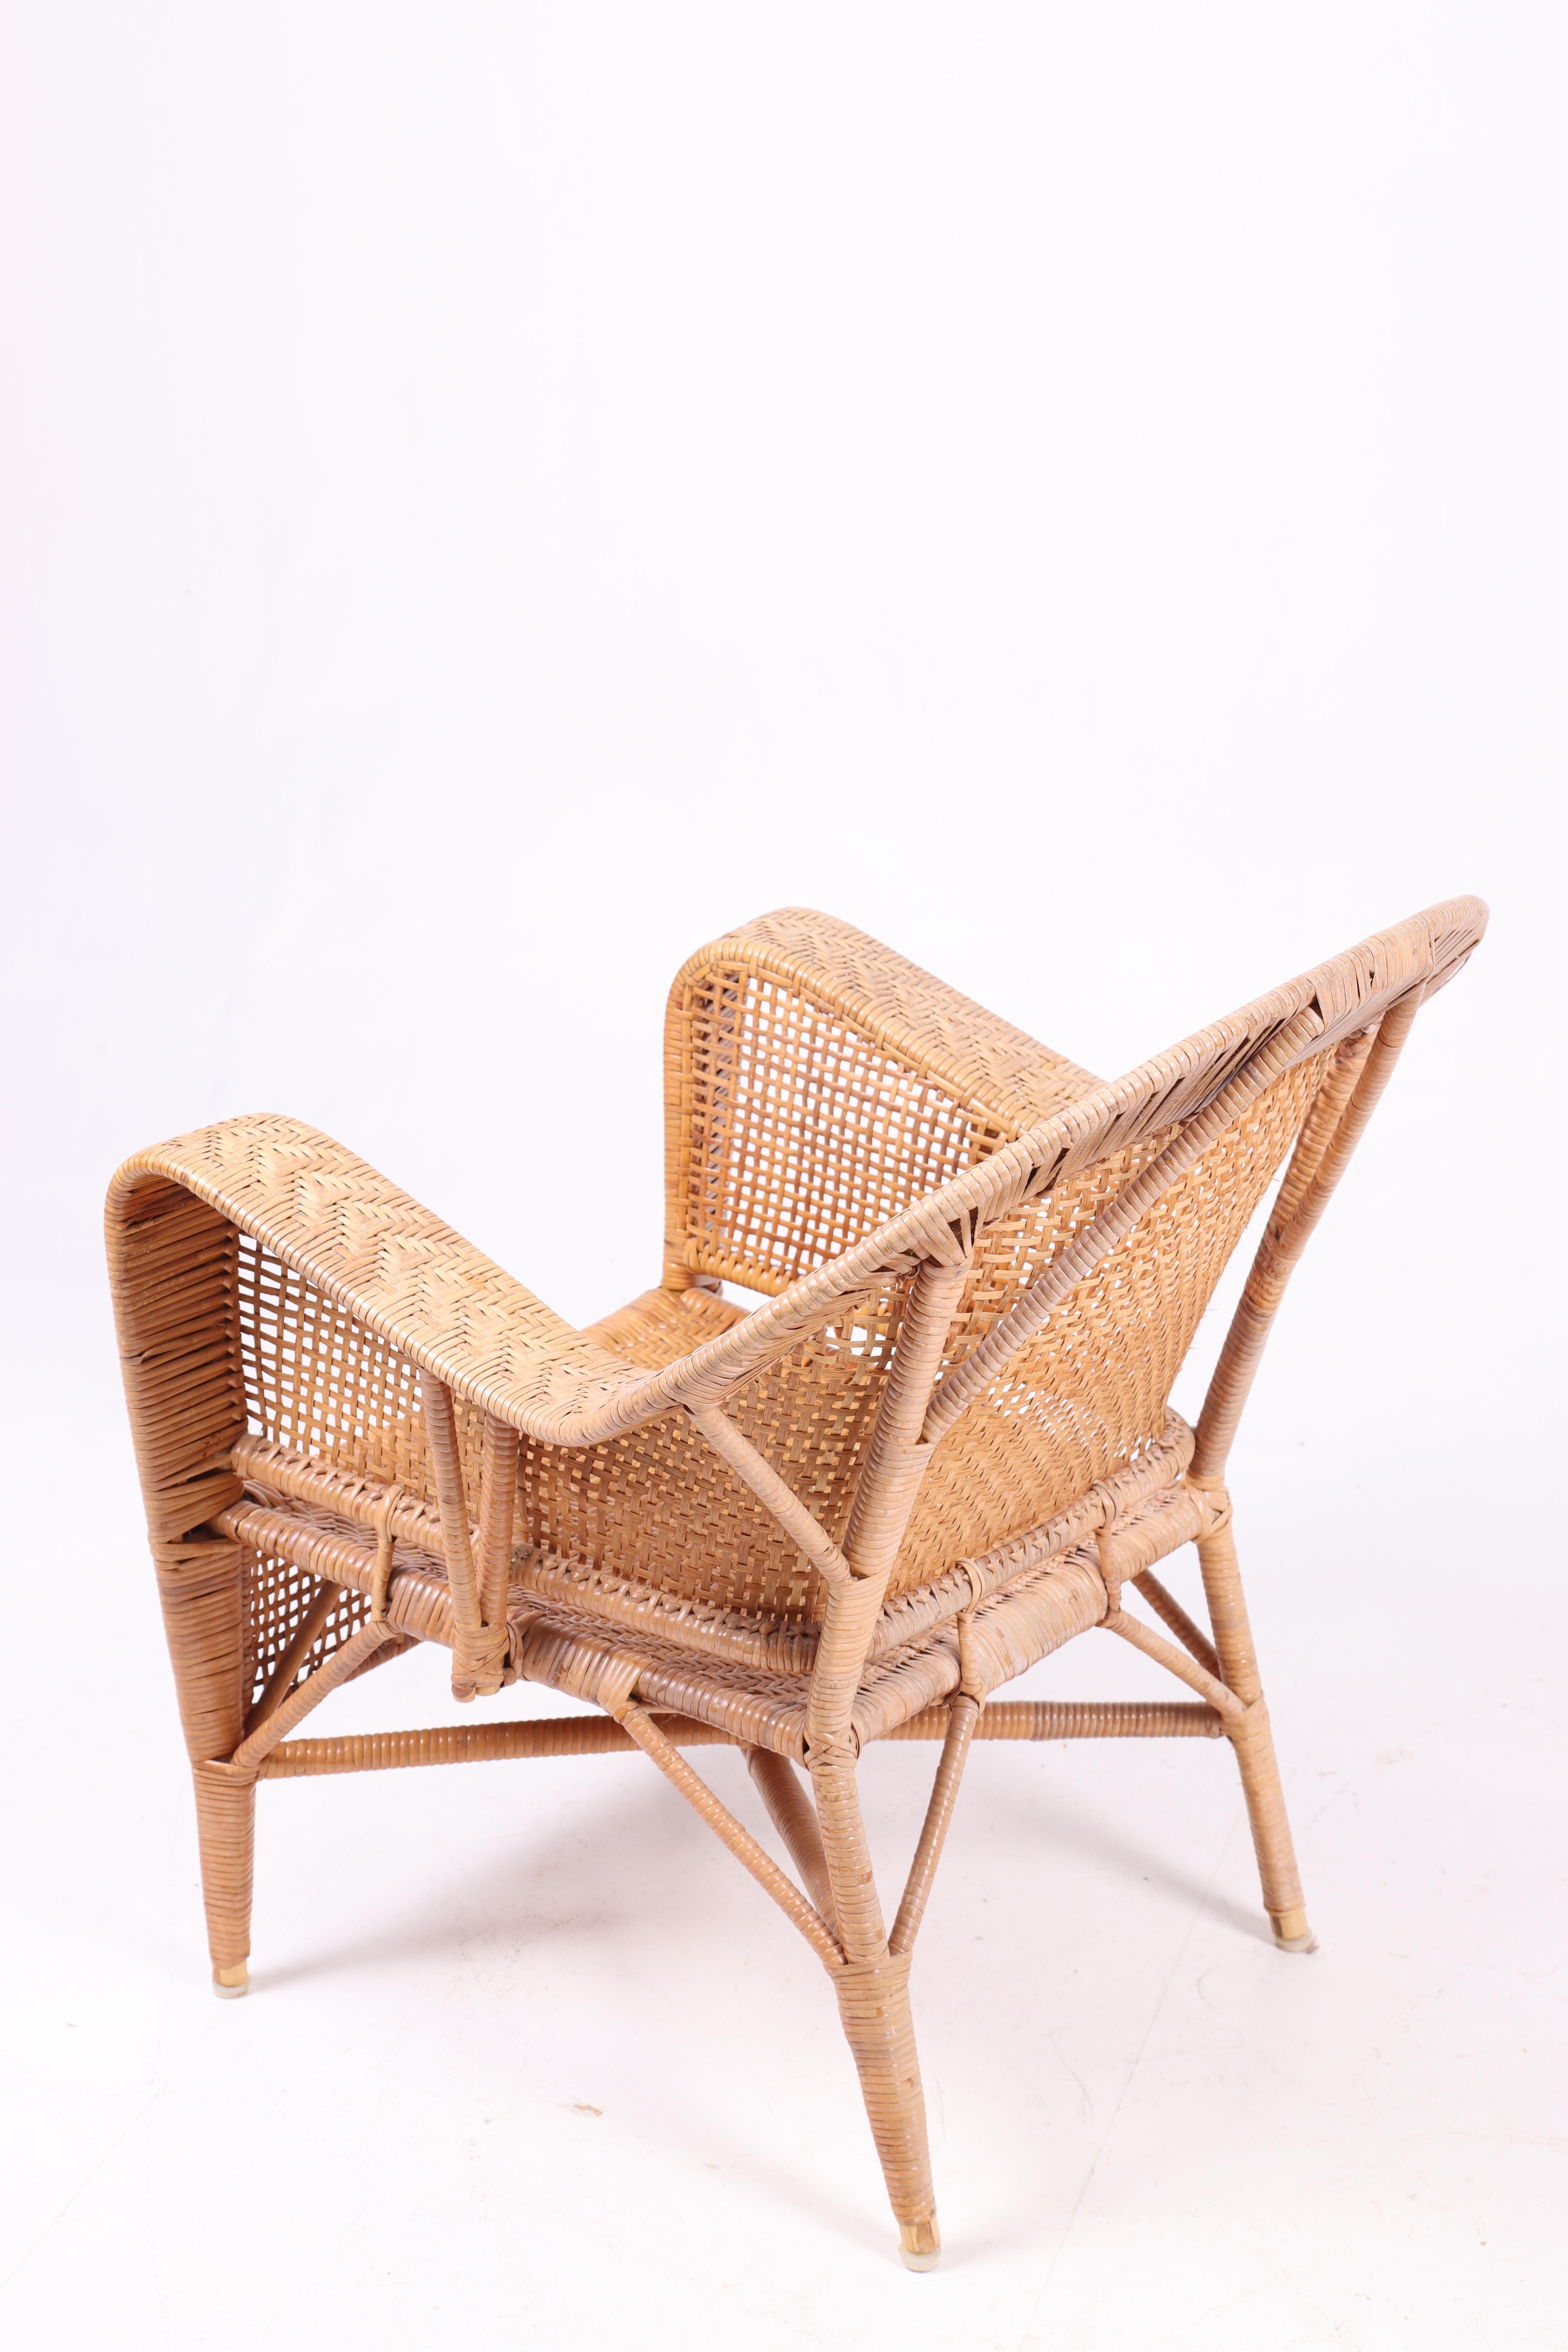 Mid-20th Century Pair of Rattan Lounge Chairs by Kay Fisker, 1950s For Sale